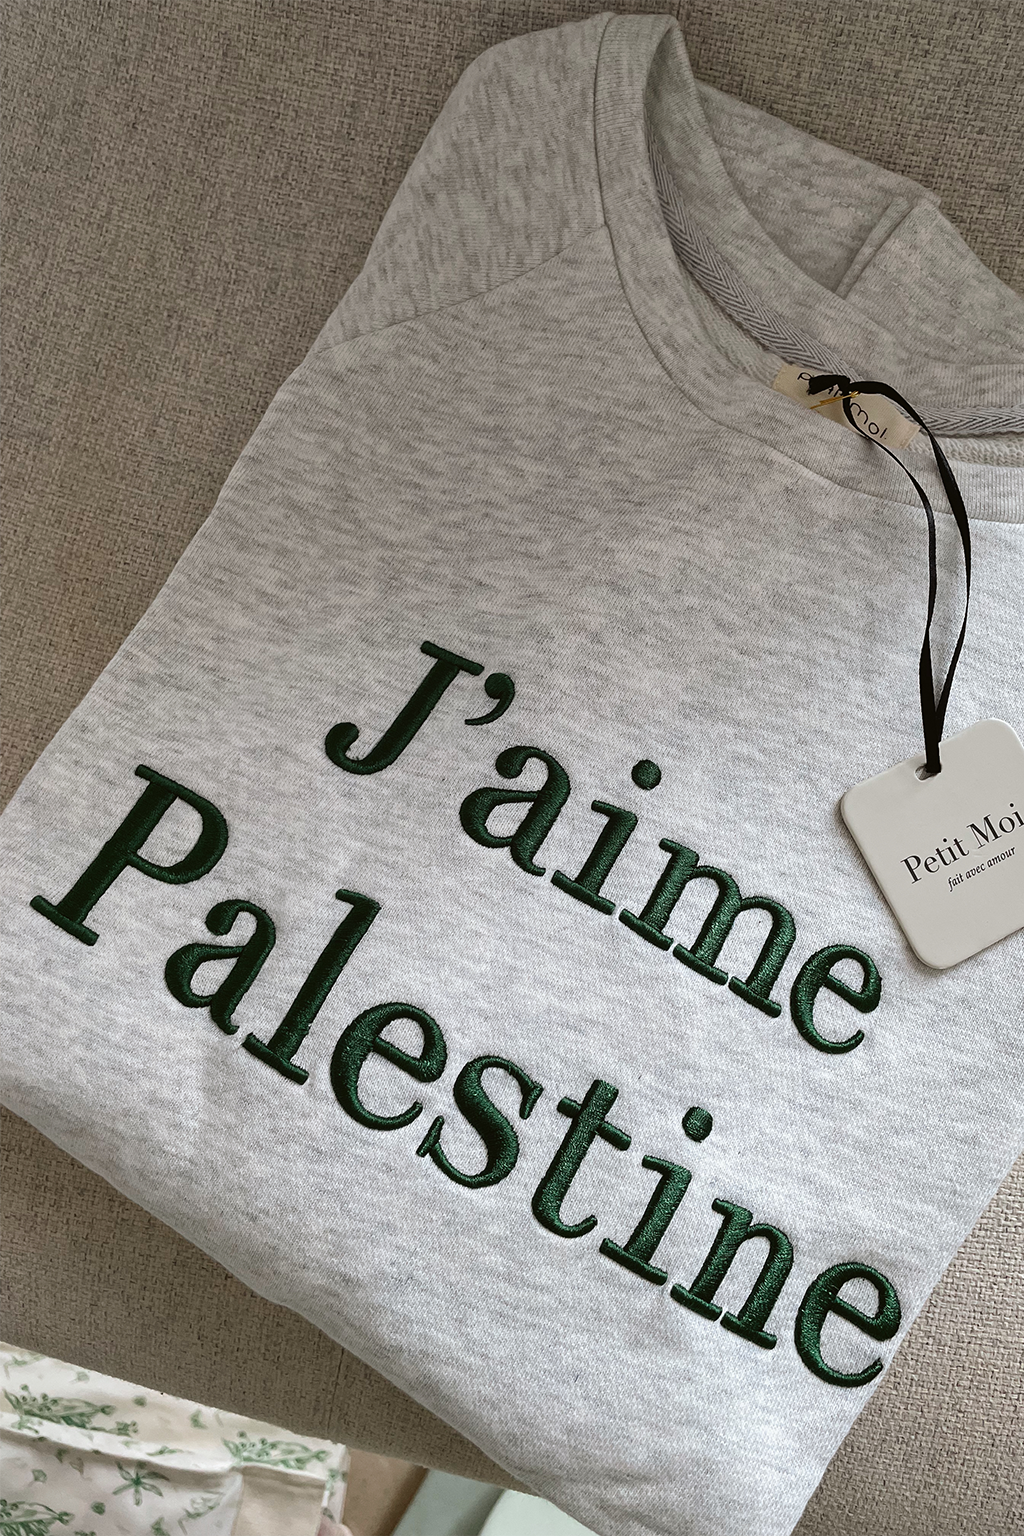 Love for palestine inspired sweater. Made by petit moi